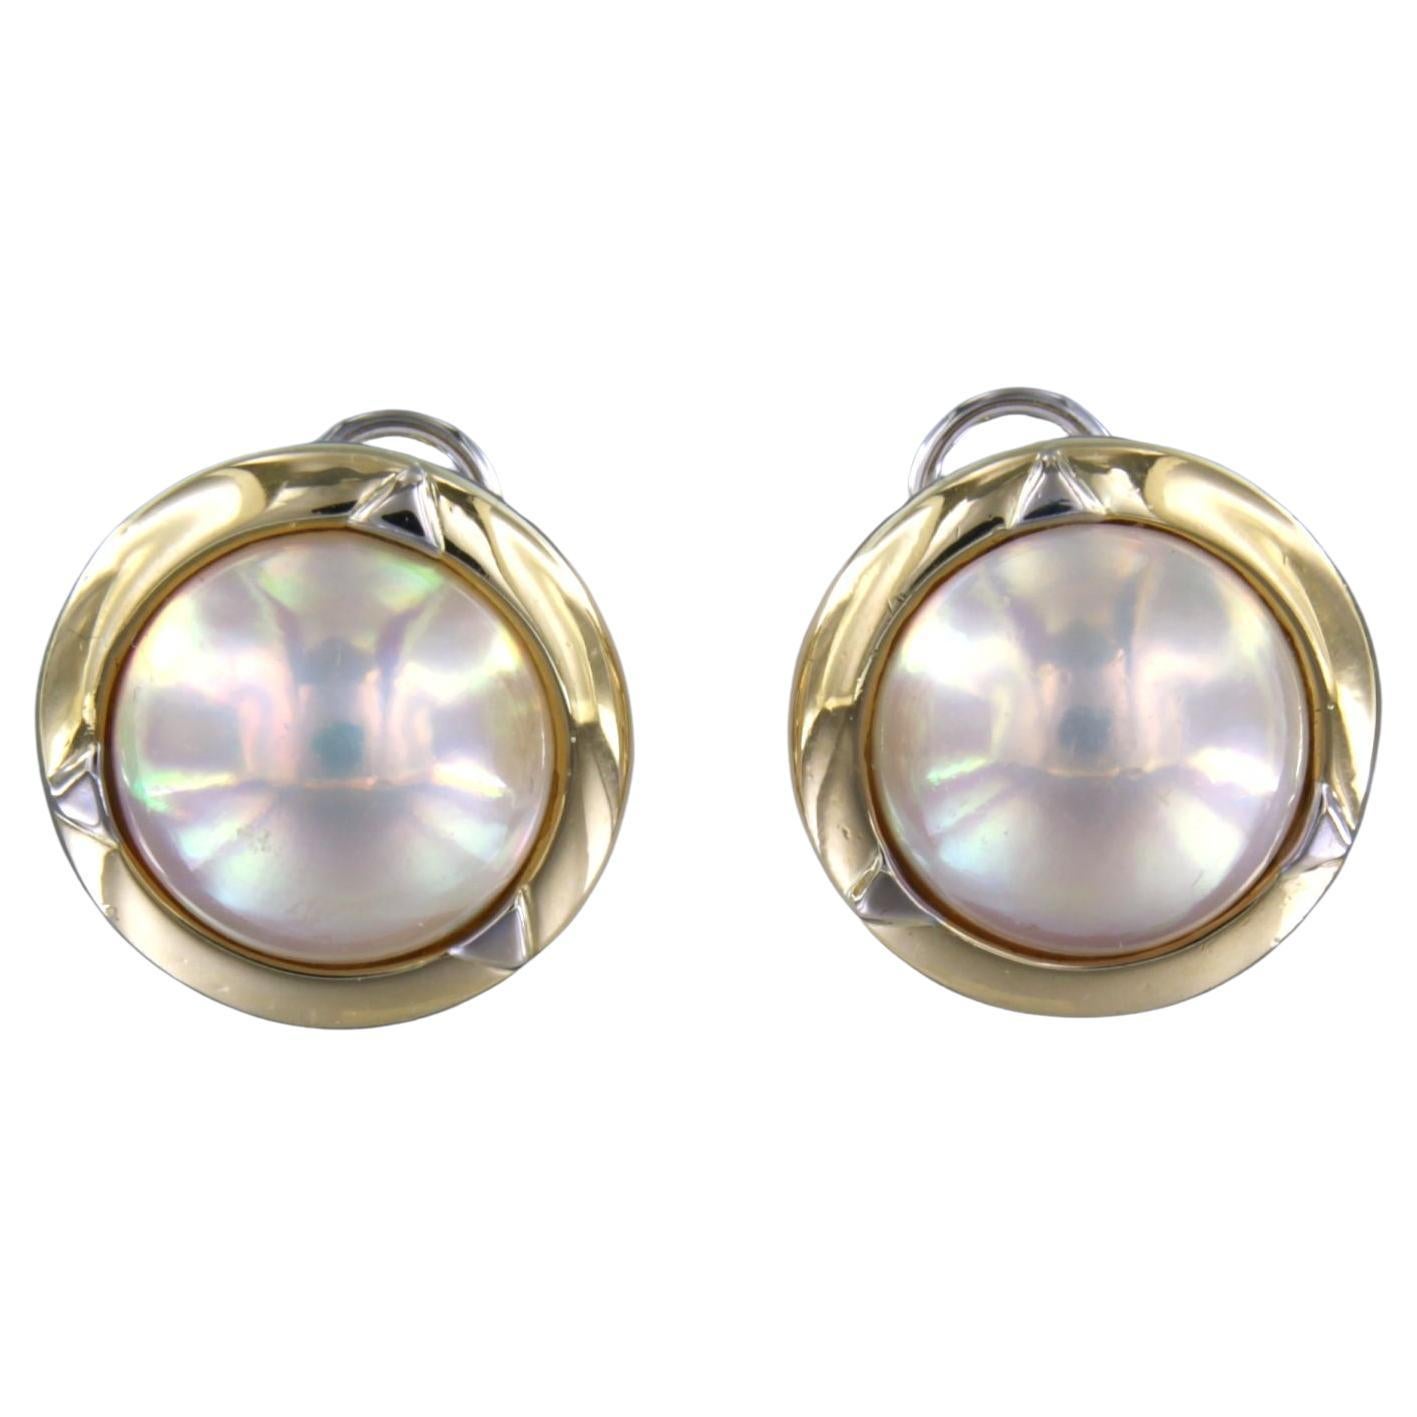 Earrings set with mabee pearl 18k yellow gold